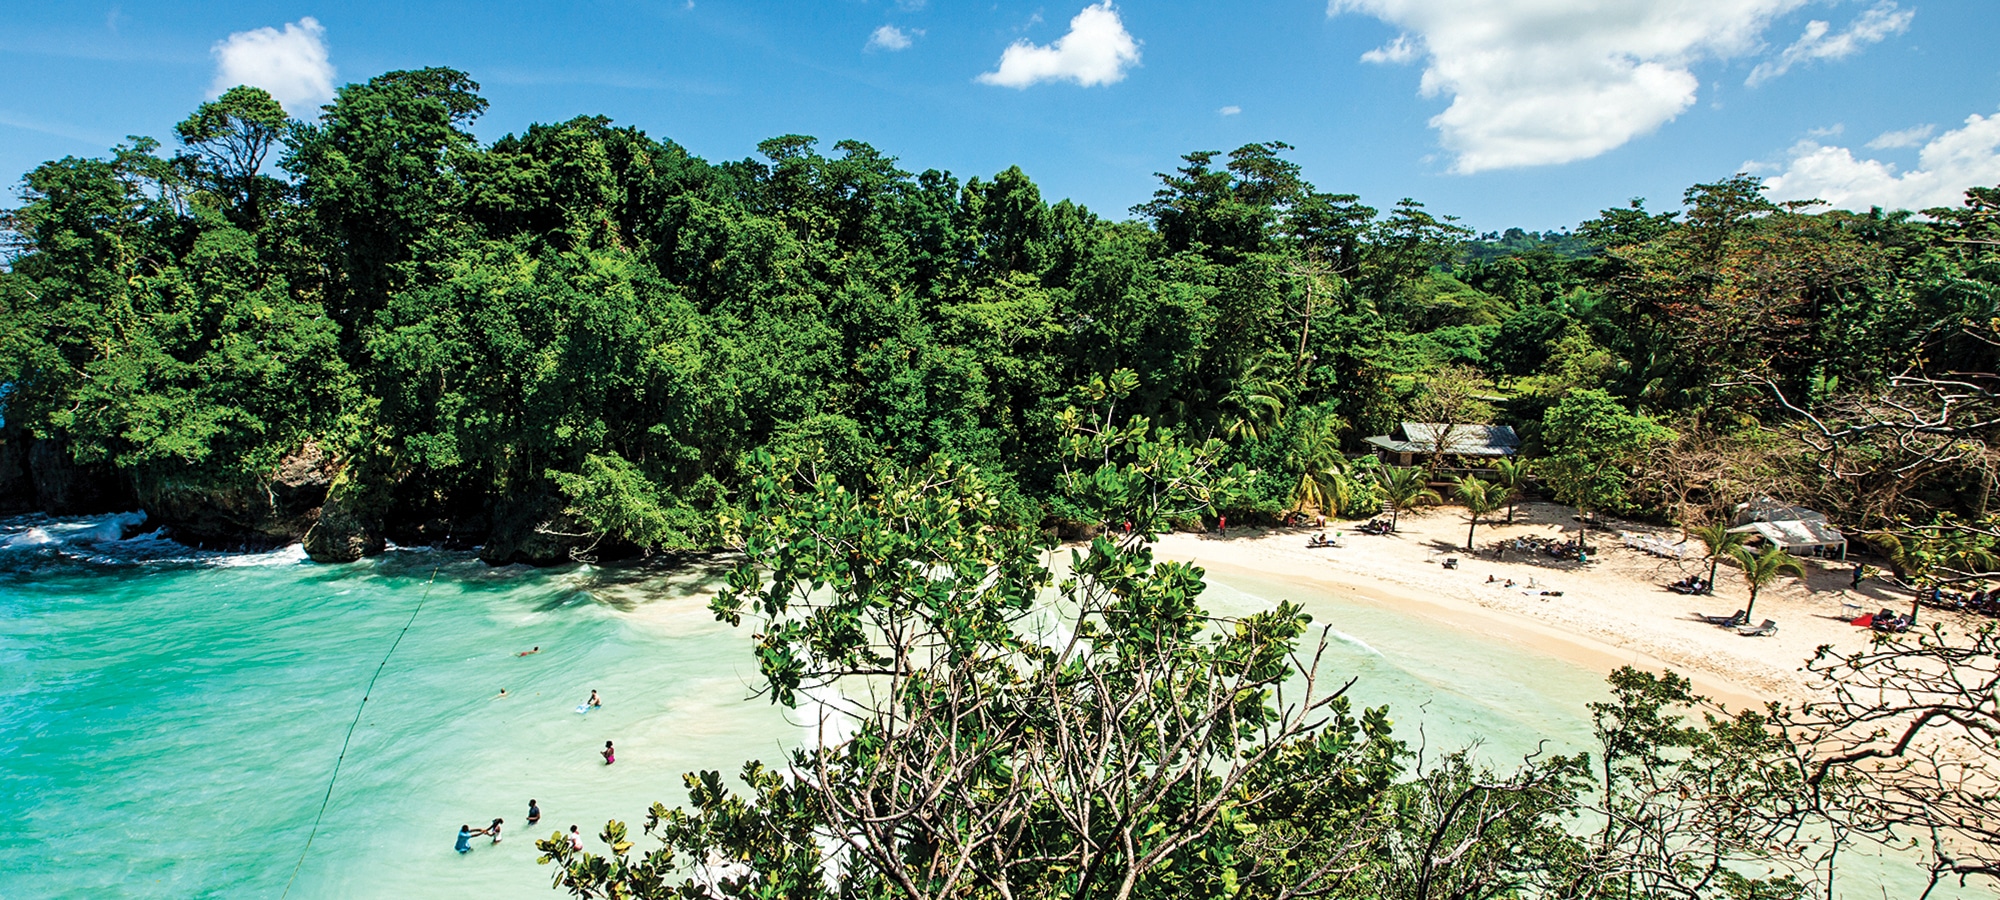 Port Antonio, a forgotten slice of northeastern Jamaica, has it all: welcoming locals, gorgeous beaches, cultural authenticity — and, recently, a quiet revival.